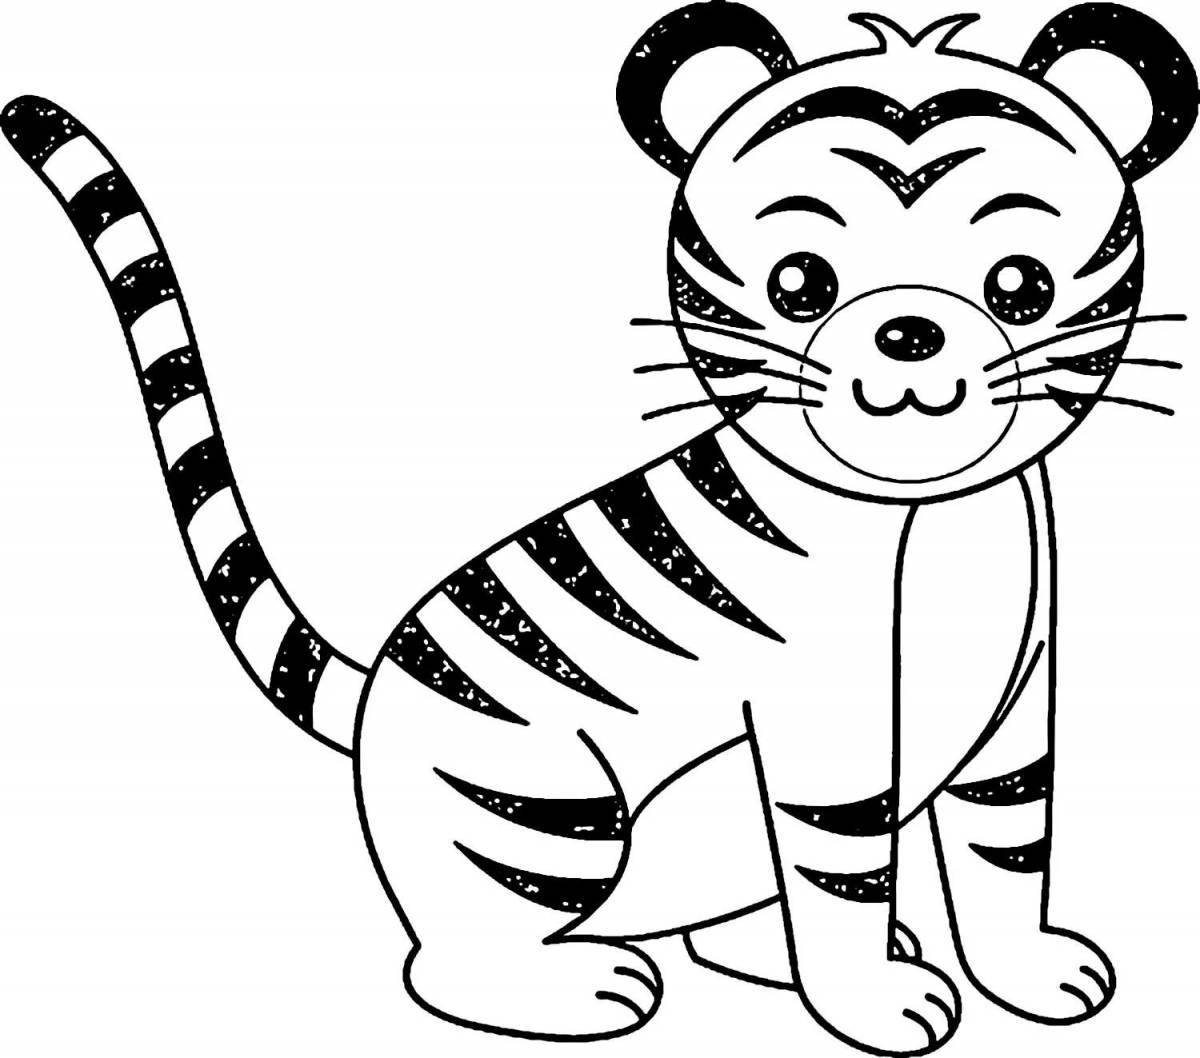 Glowing tiger cub coloring page